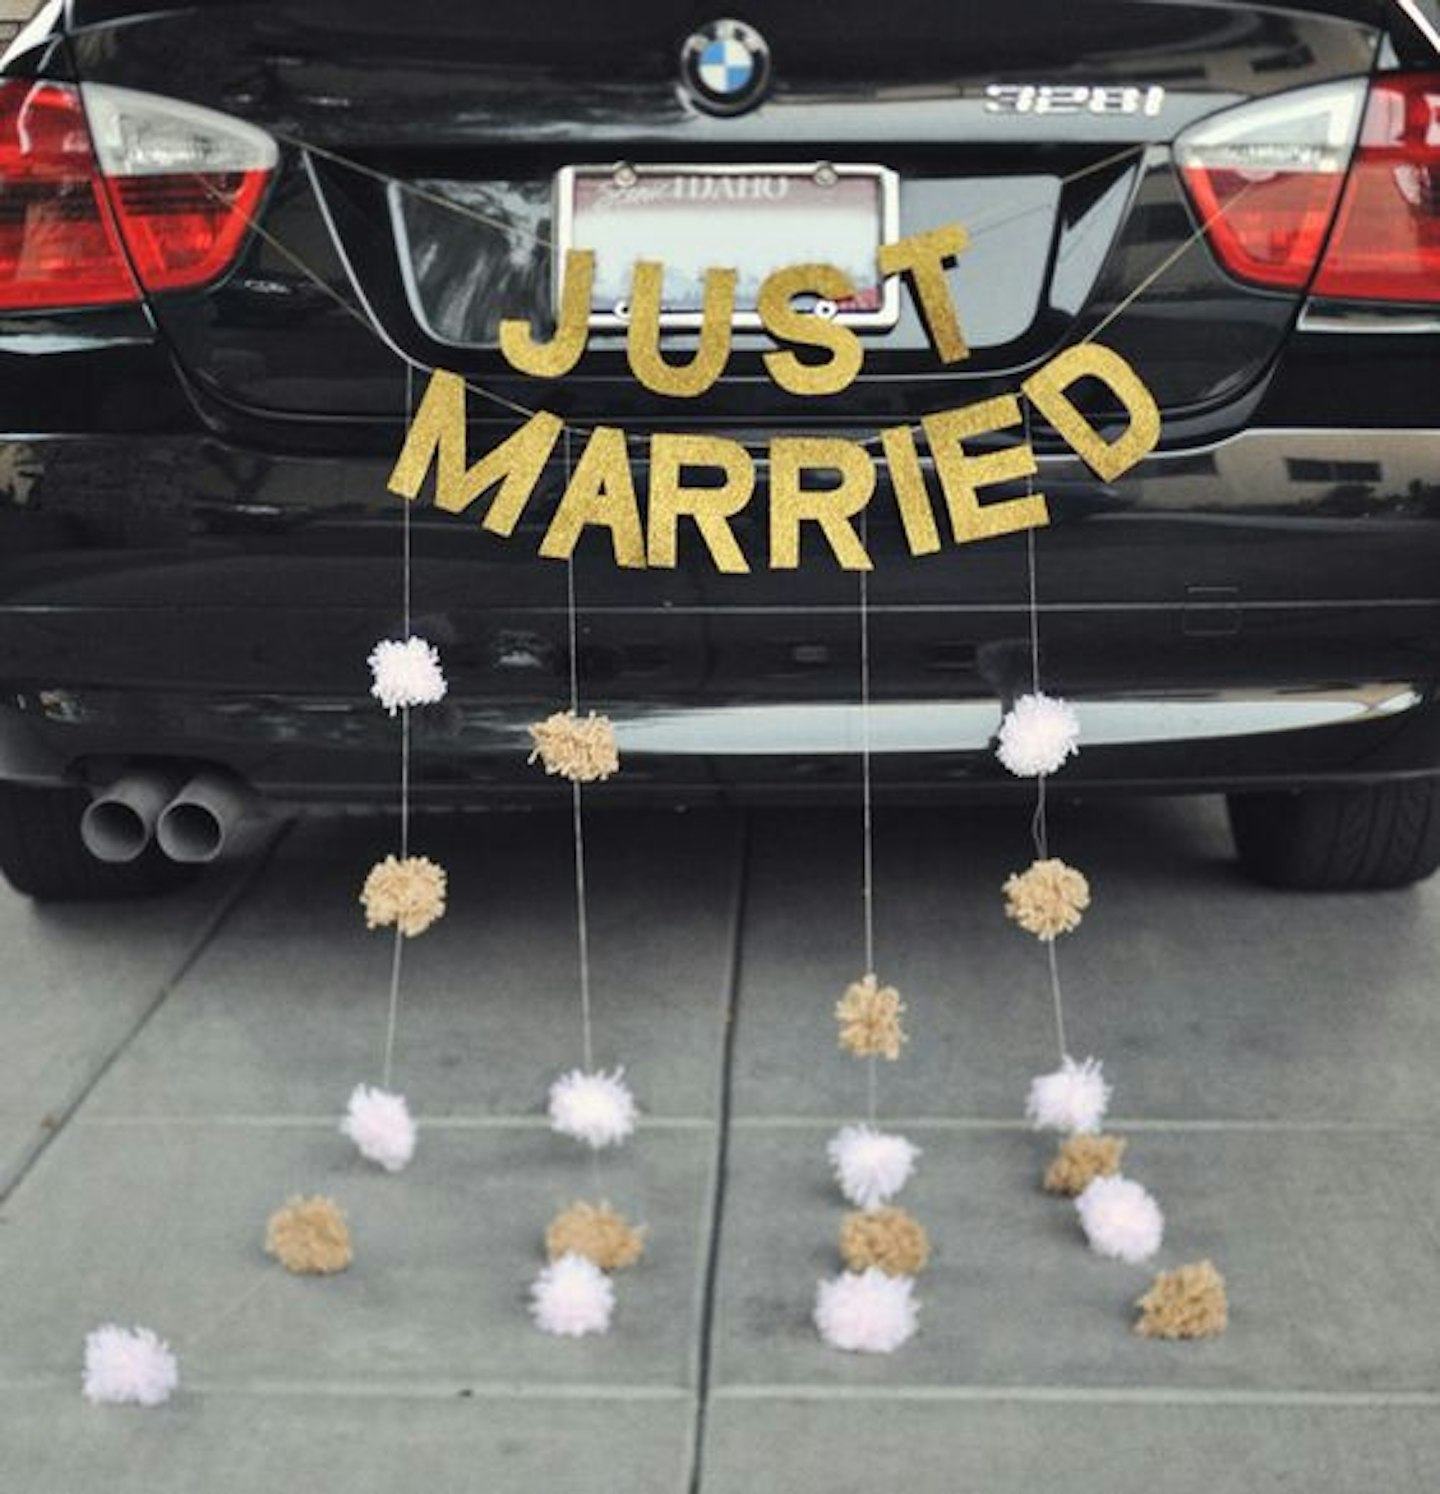 8 wonderful wedding car decorations that will have you reaching